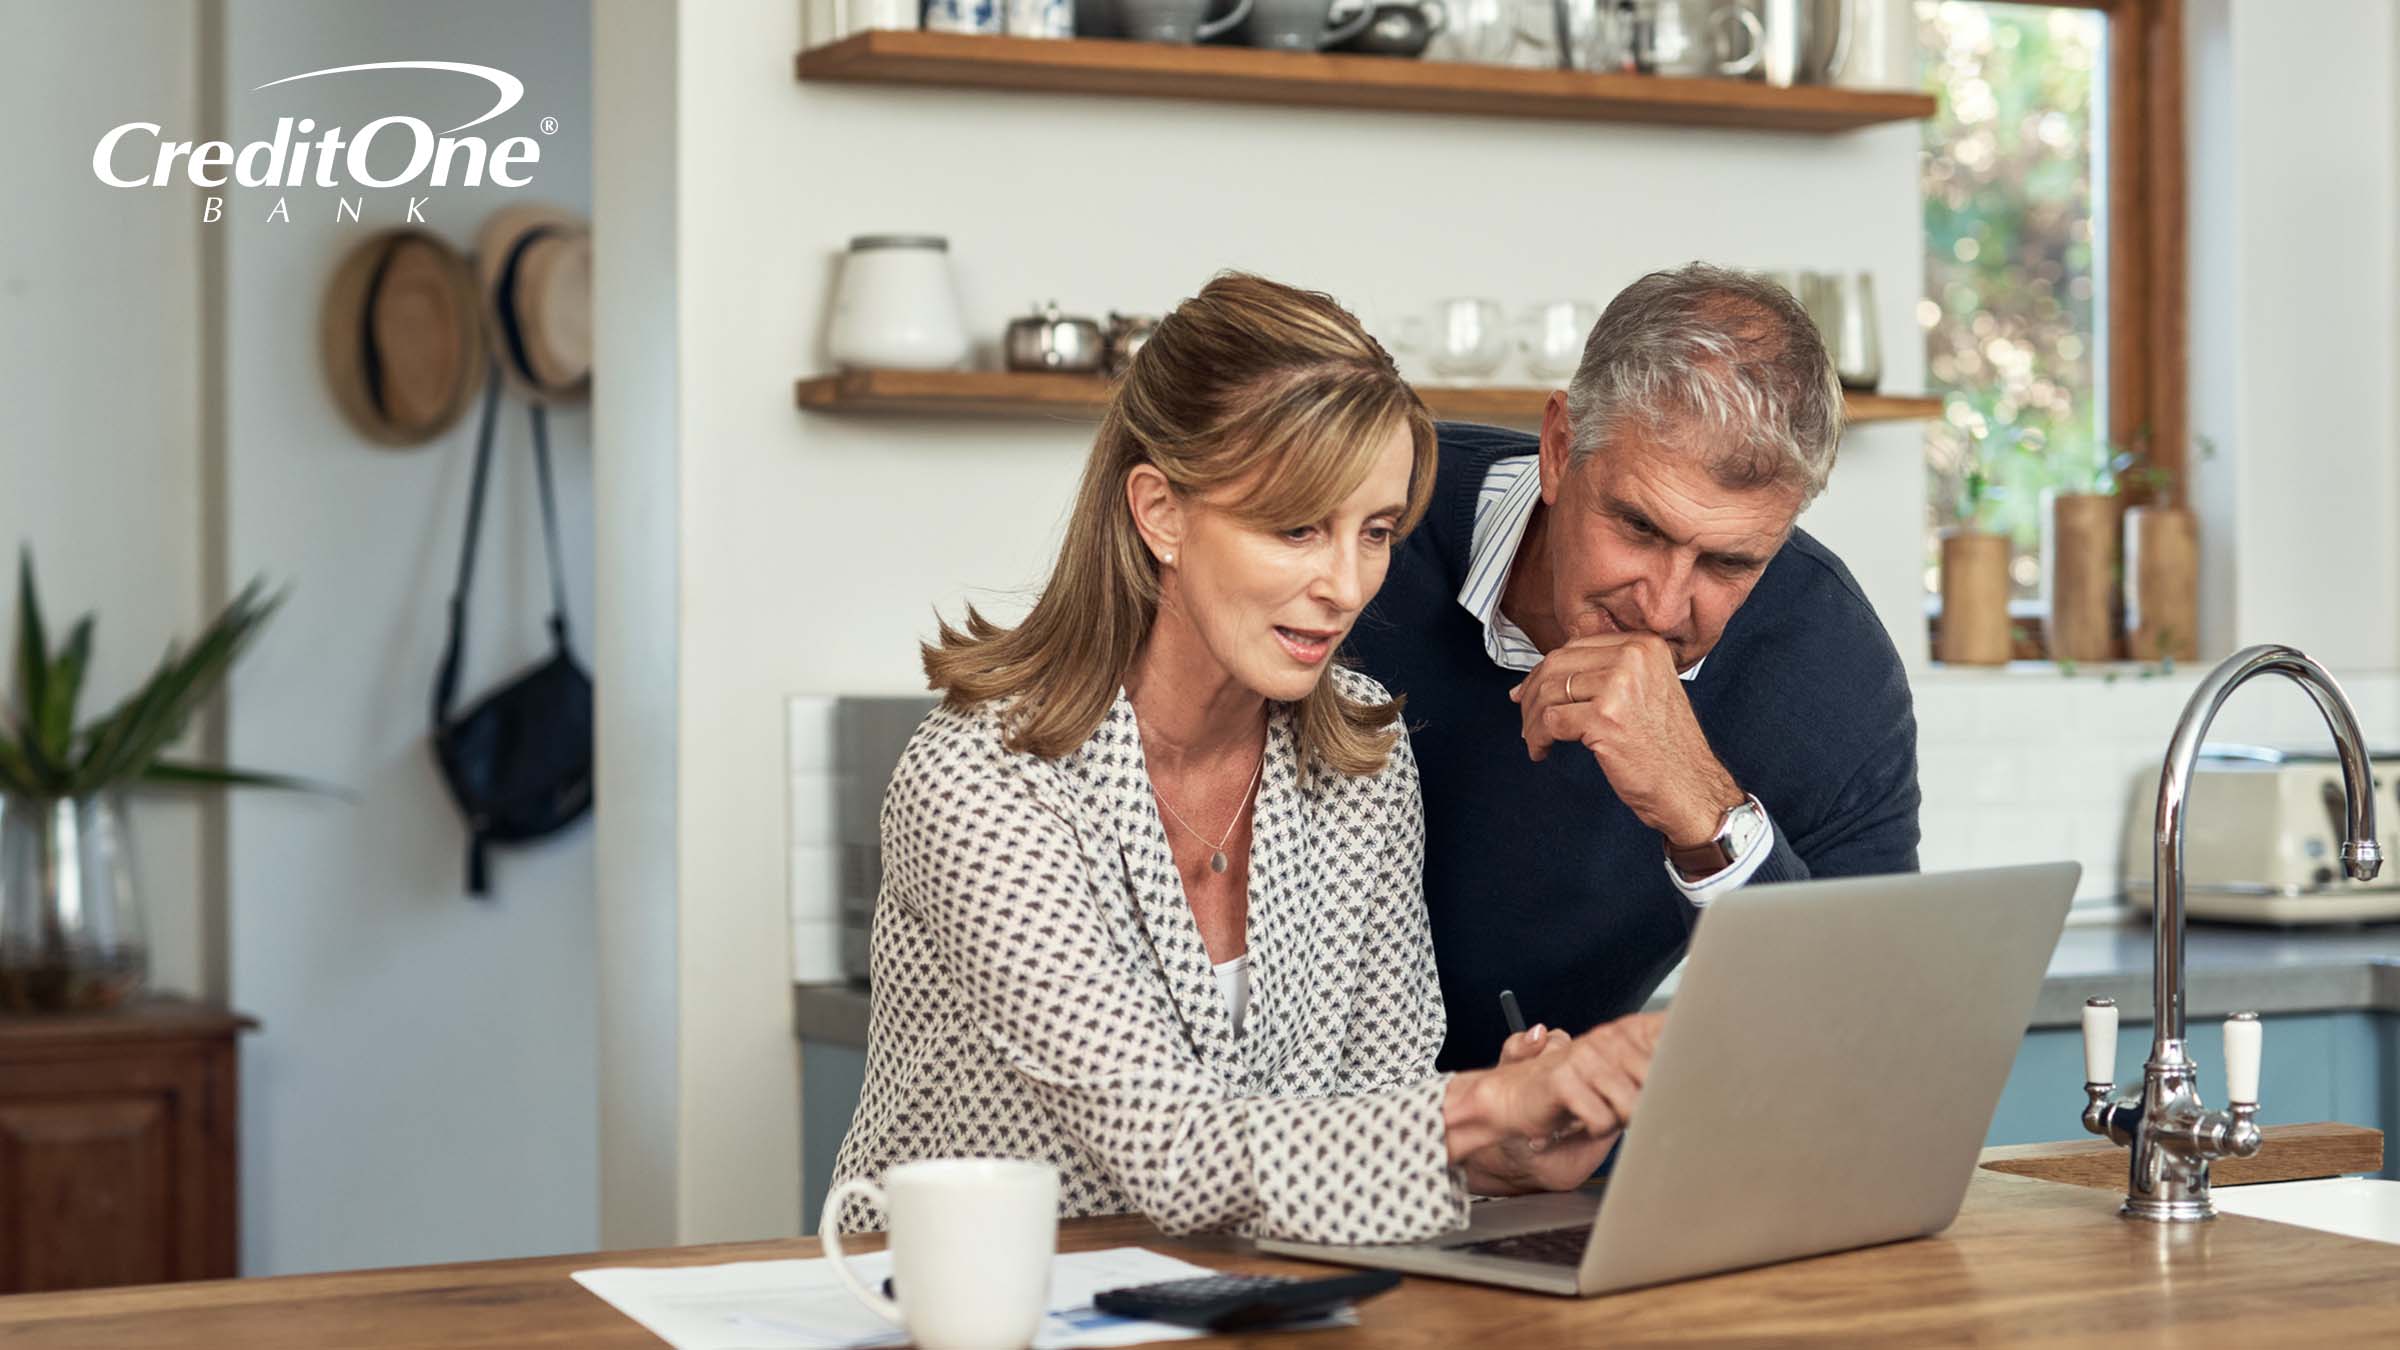 A senior, high-earning couple review their finances, including their retirement, on a laptop amidst concerns related to career volatility.